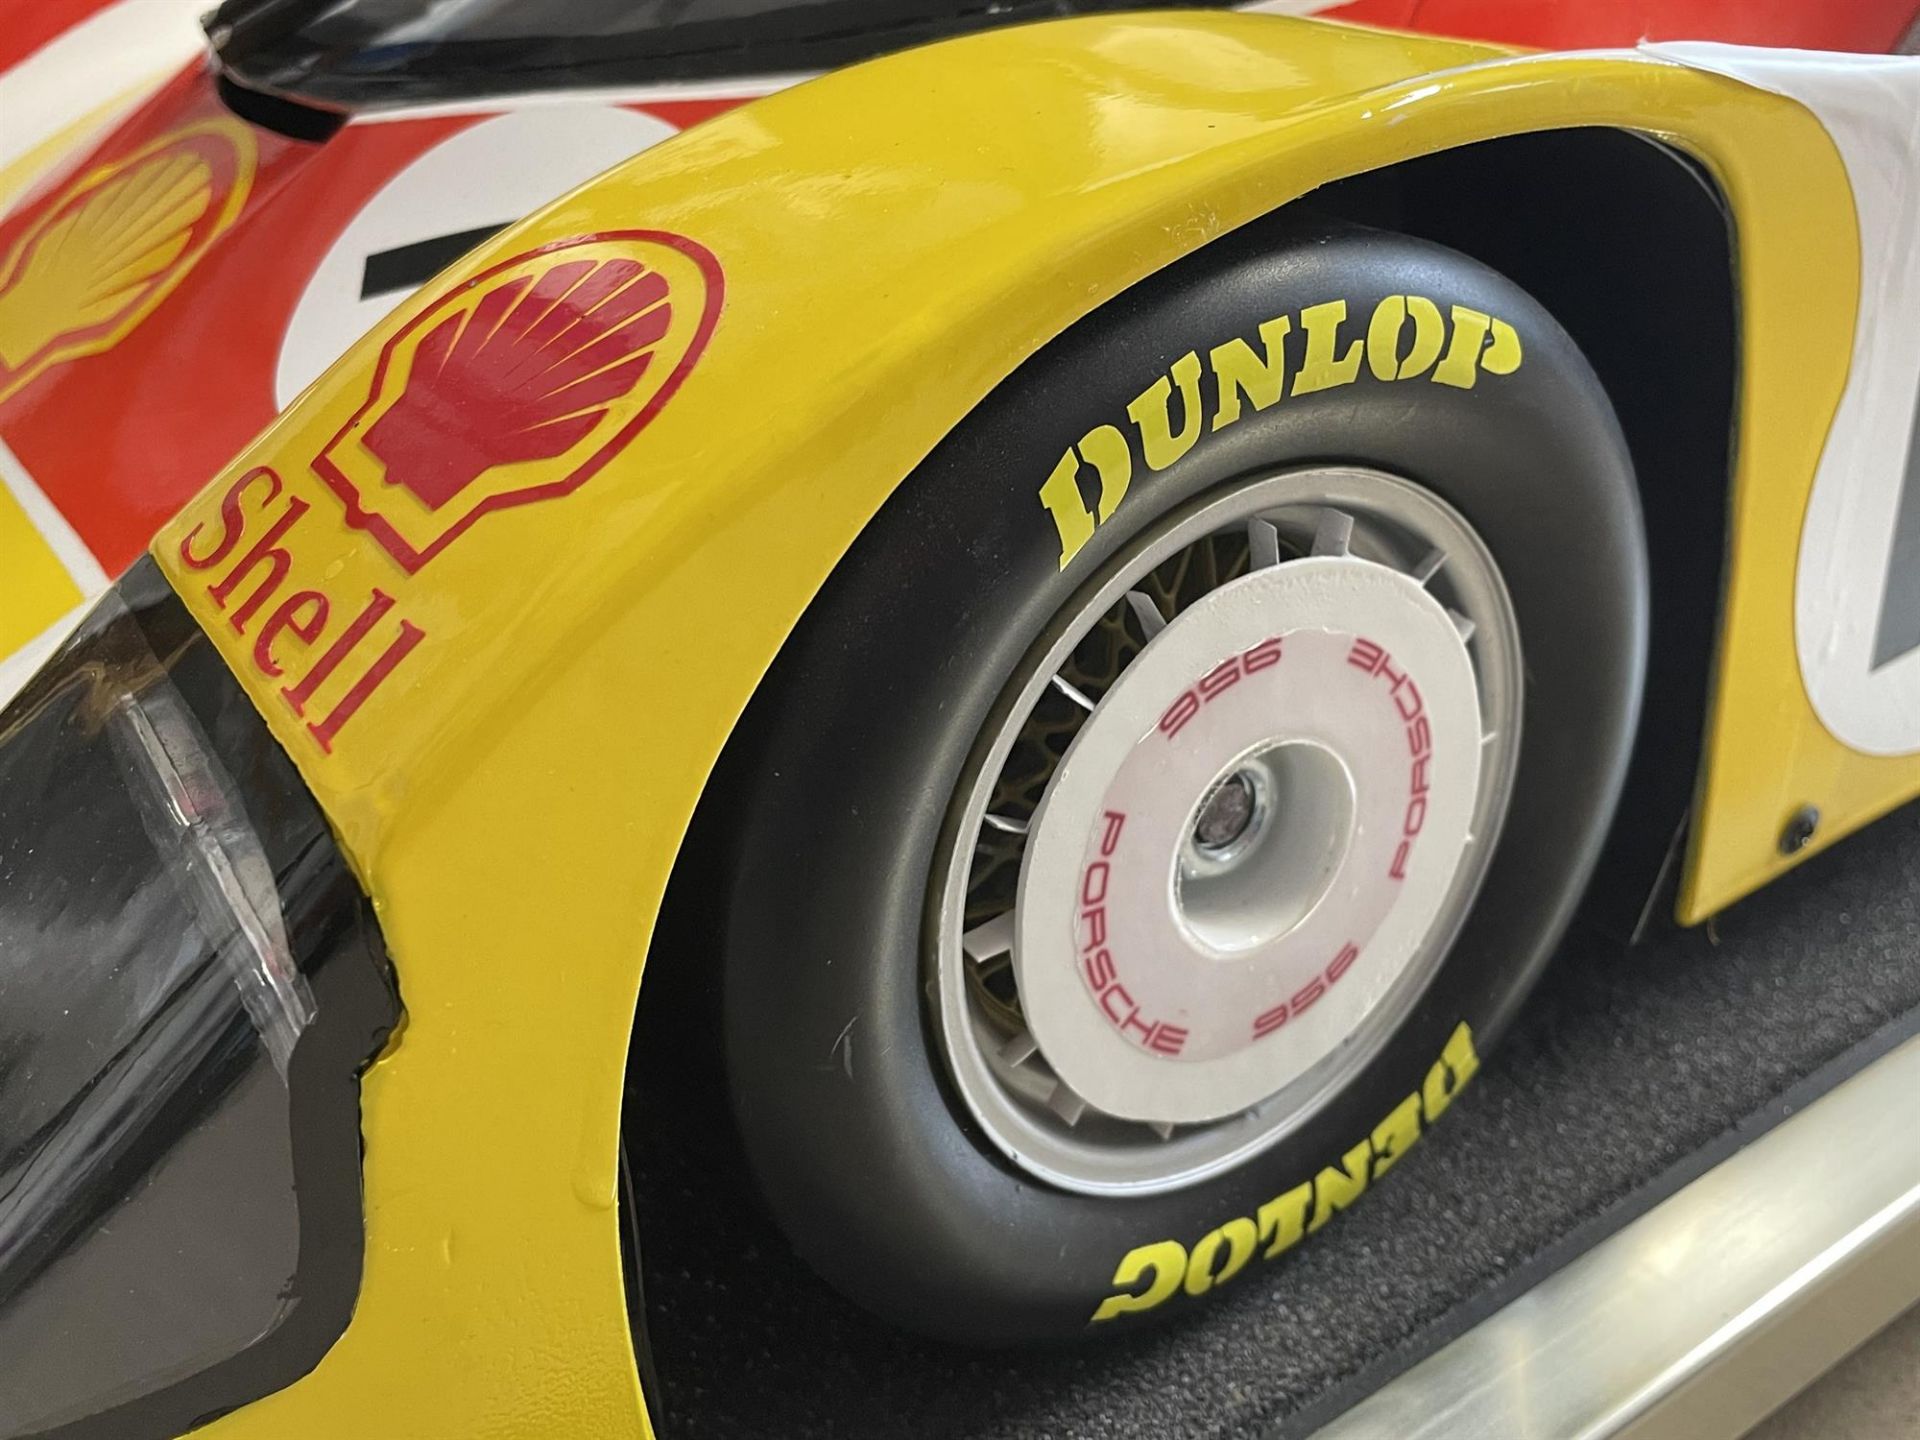 Stunning 1:5th Scale Dunlop-Shell Porsche 956 by Javan Smith - Image 6 of 10